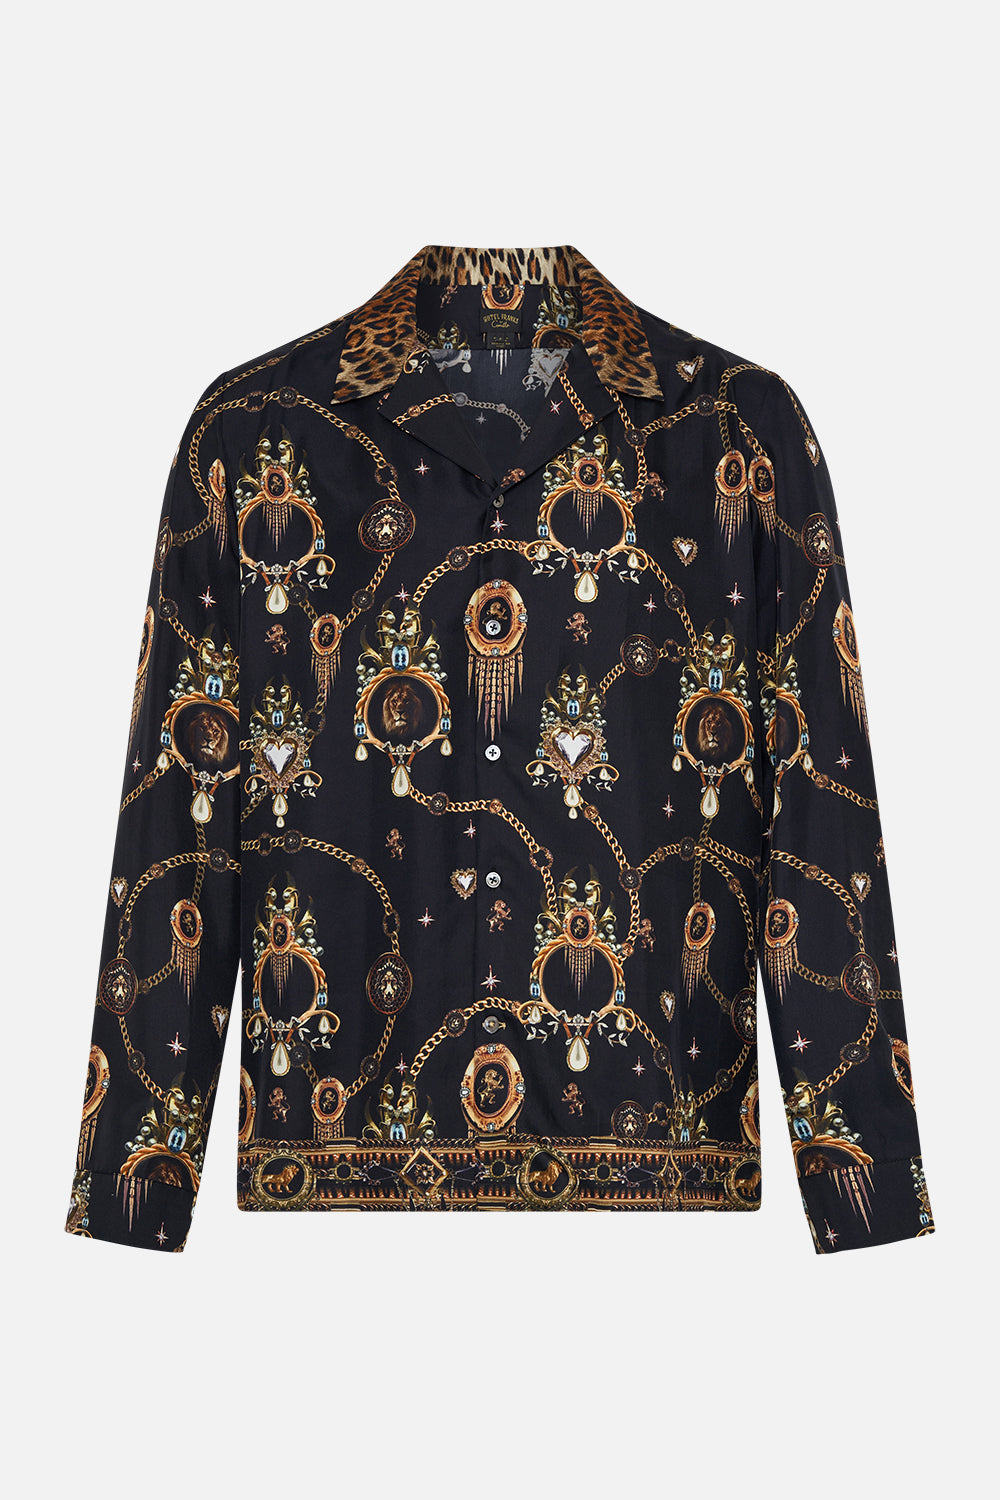 Product view of Hotel Franks by CAMILLA mens  black long sleeve silk shirt in Jungle Dreaming print